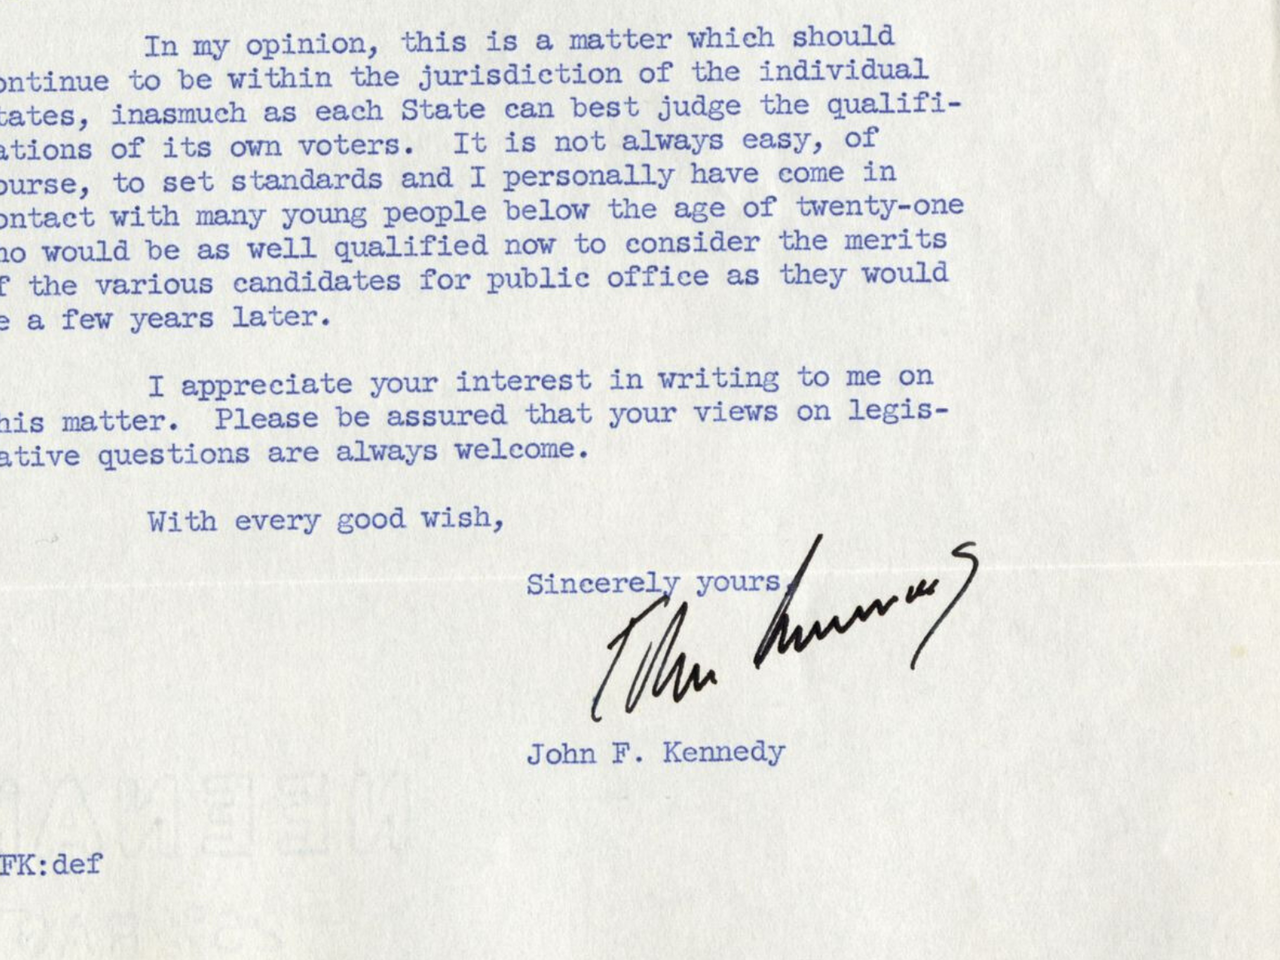 Response letter from John F Kennedy to constituent over issue of voting age